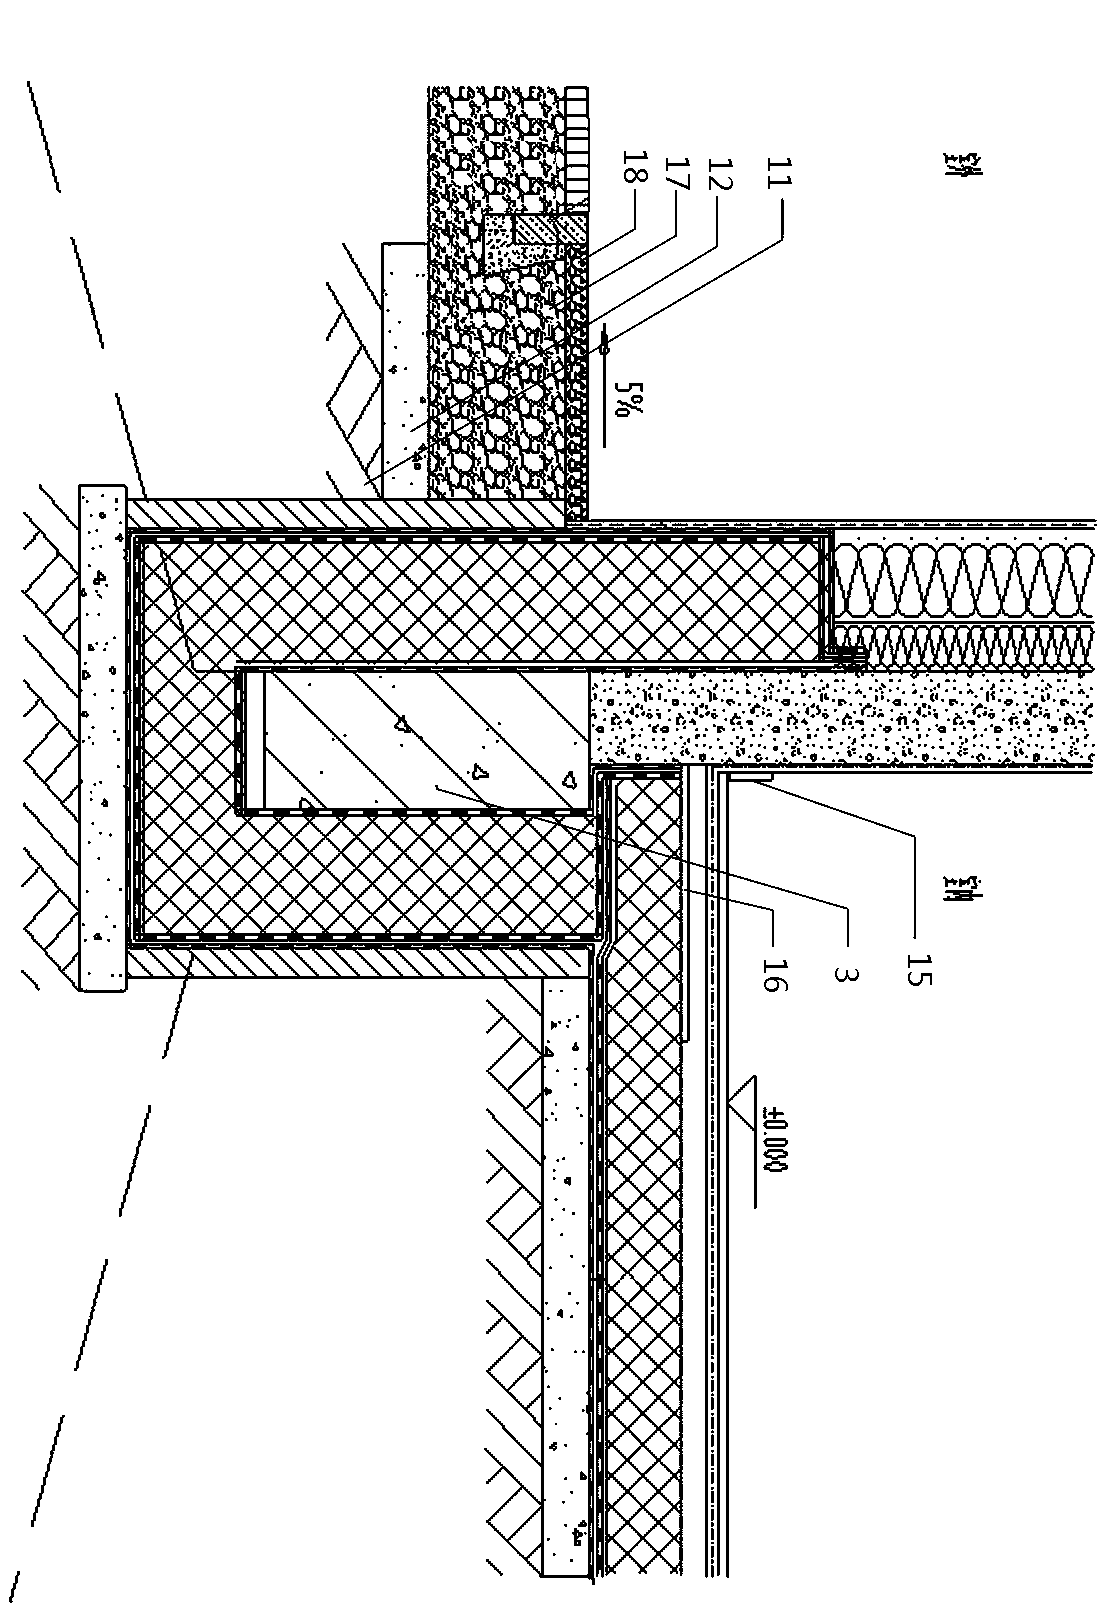 Heat insulating and pasting structure for independent foundation heat breaking bridge of ultra-low energy consumption building and construction method